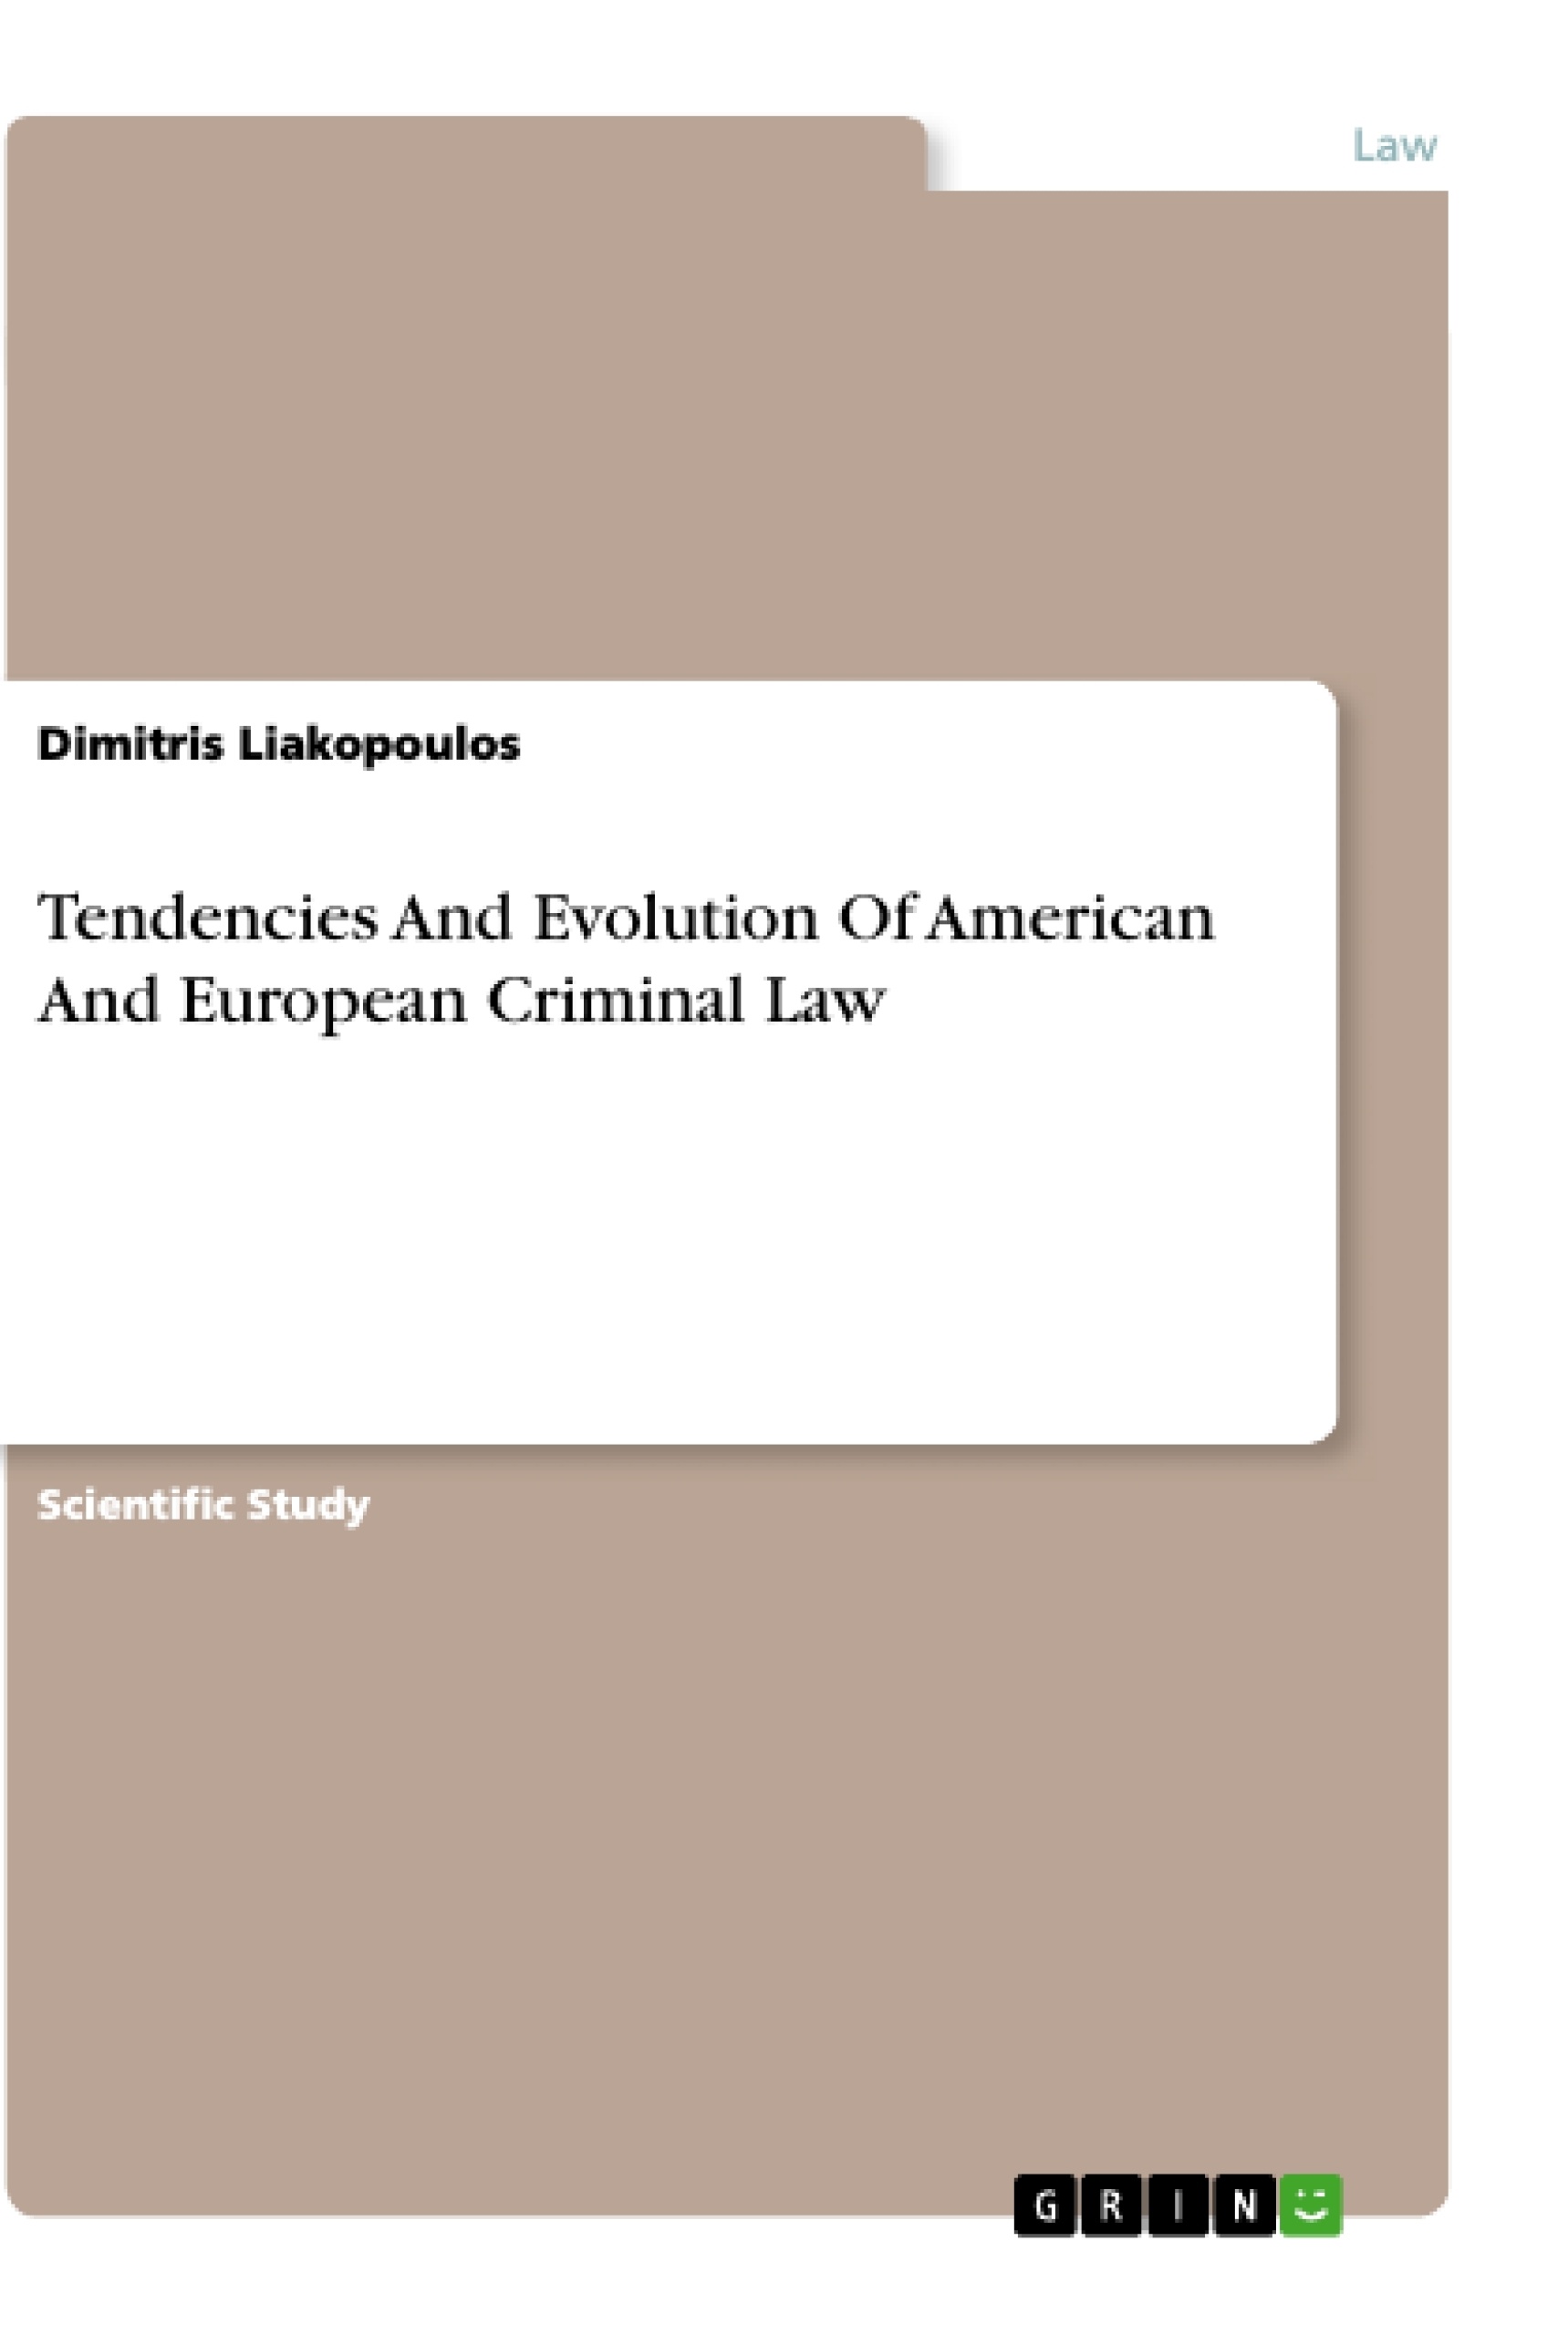 Title: Tendencies And Evolution Of American And European Criminal Law